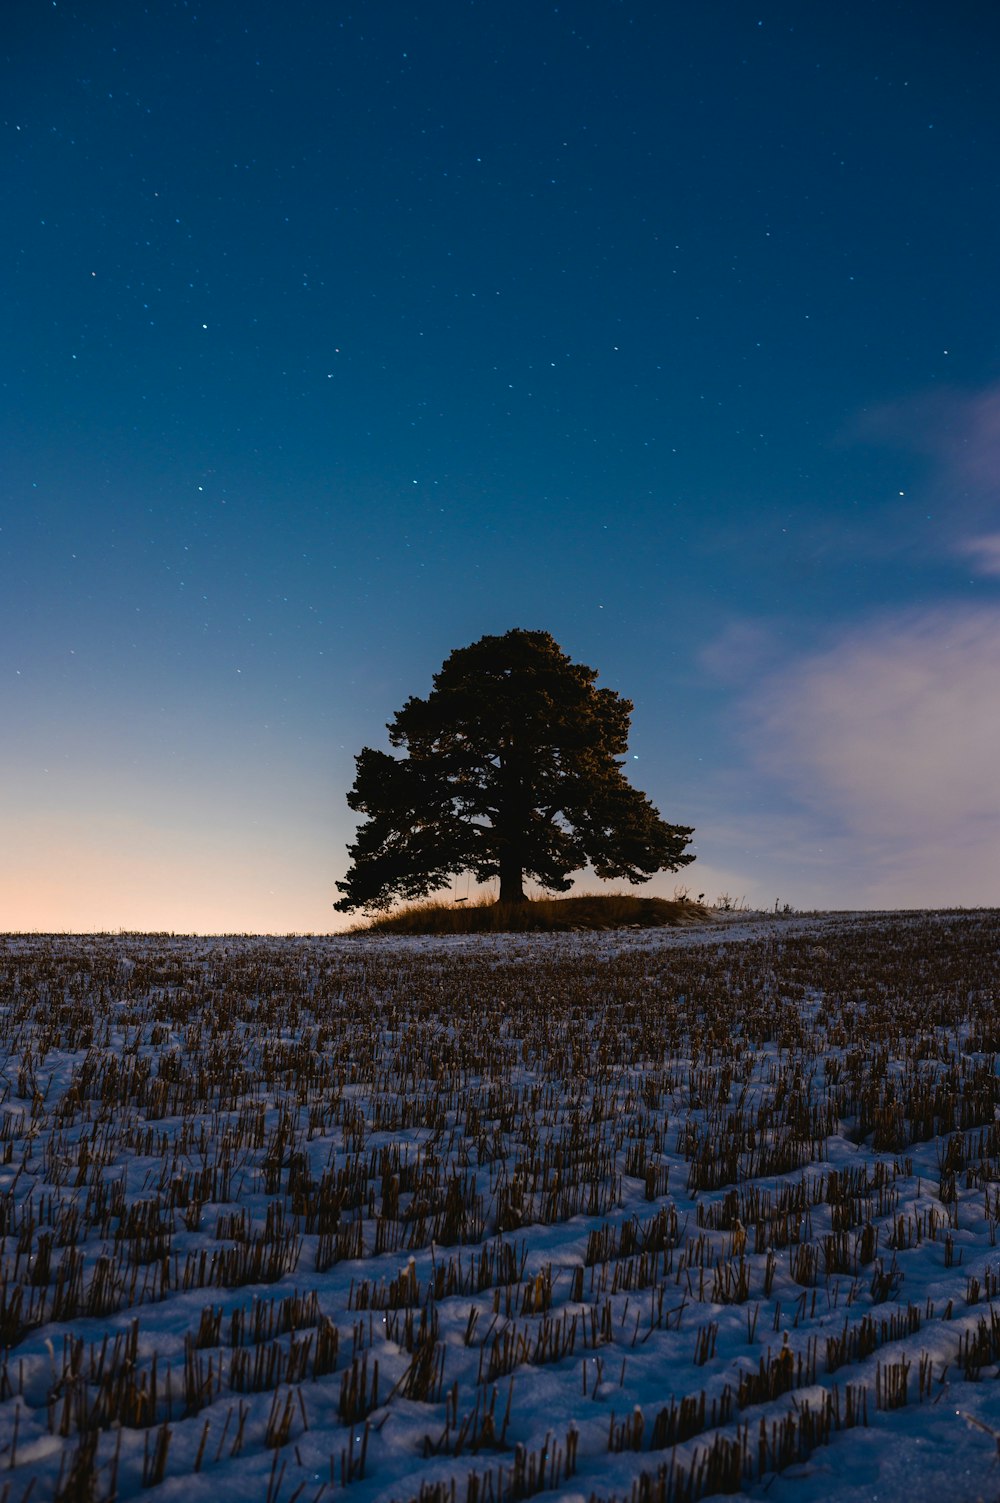 green tree on snow covered ground under blue sky during night time